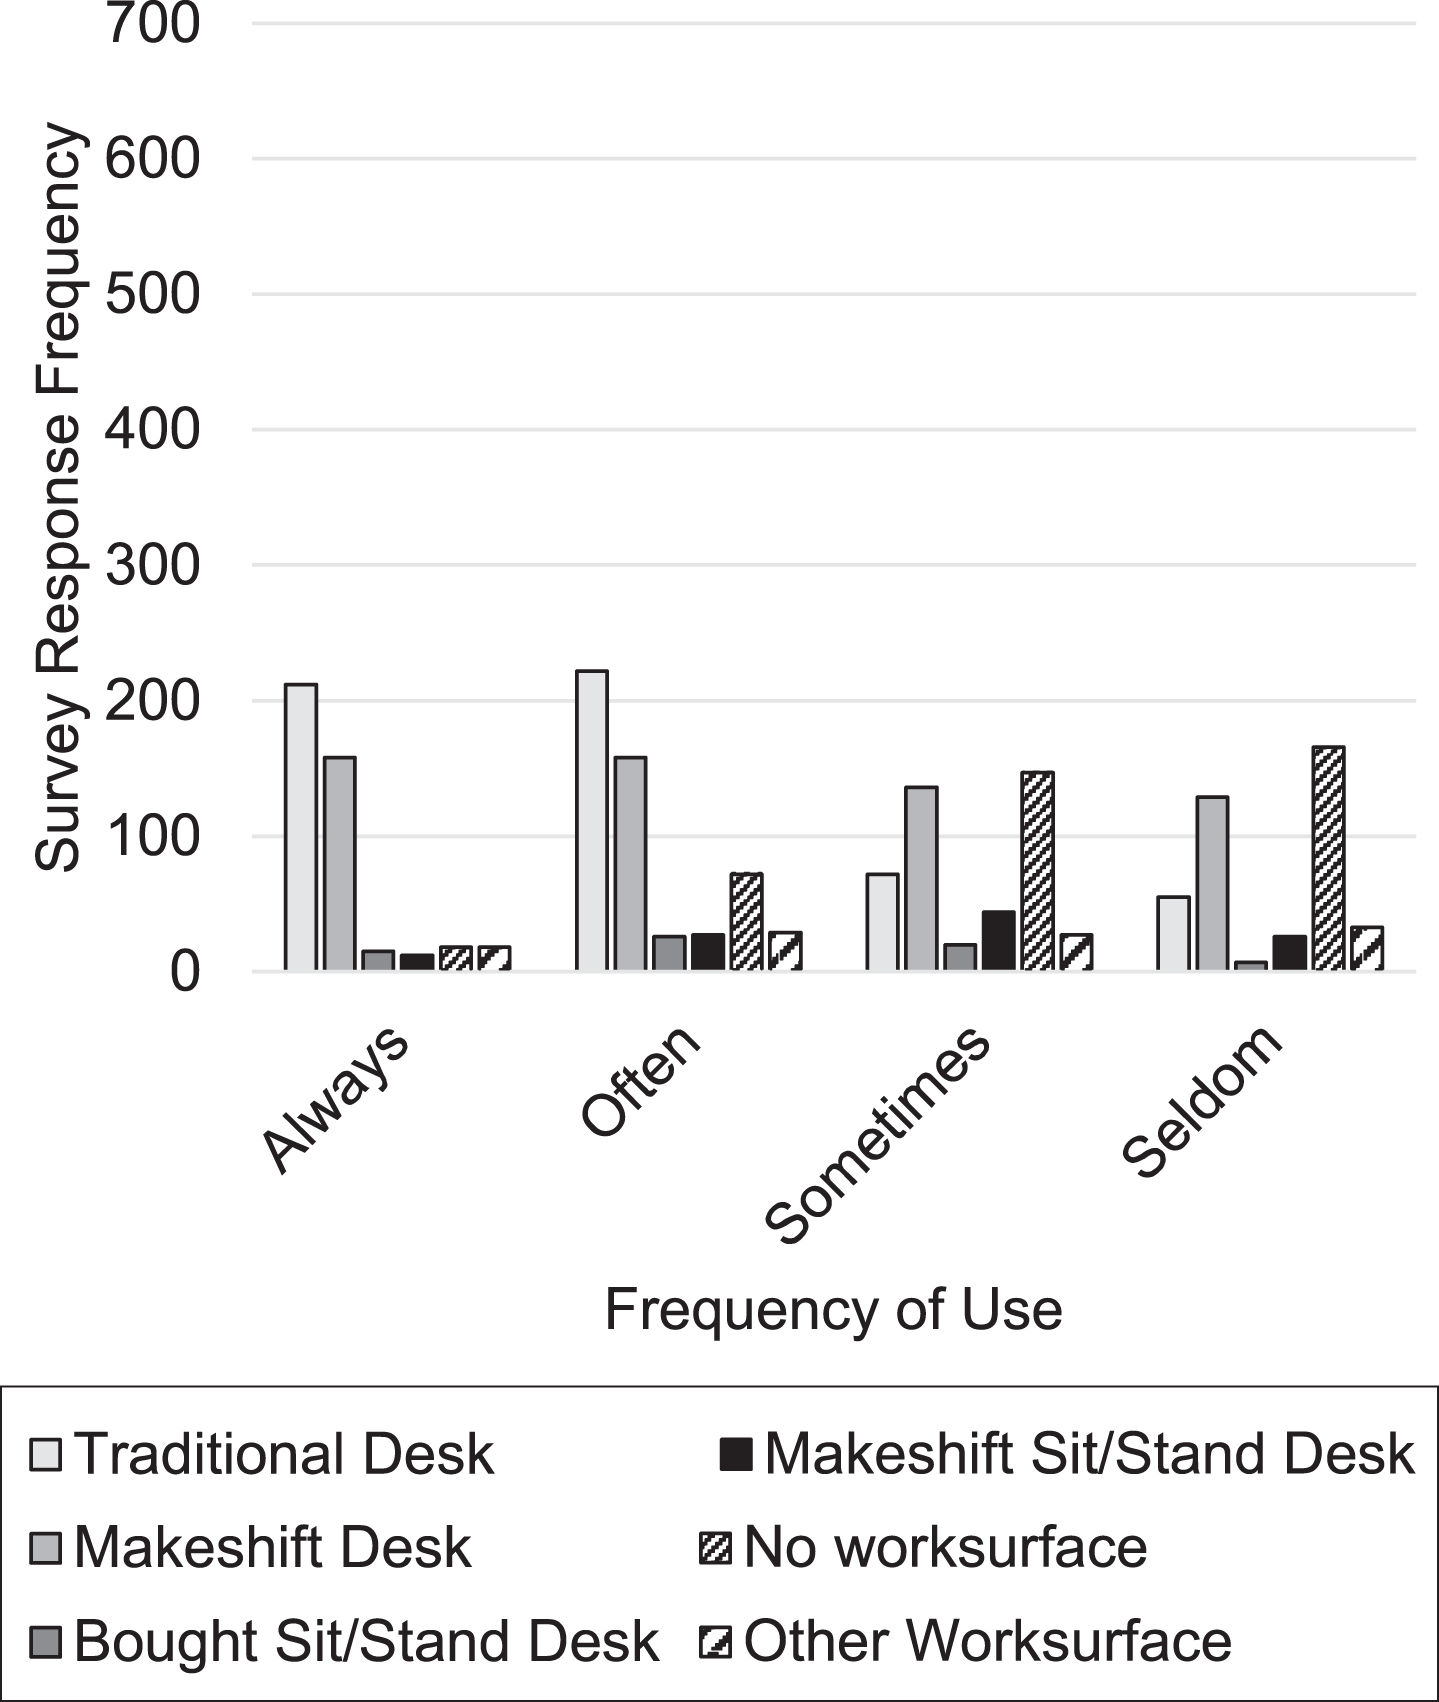 Frequency of use for each workstation type.